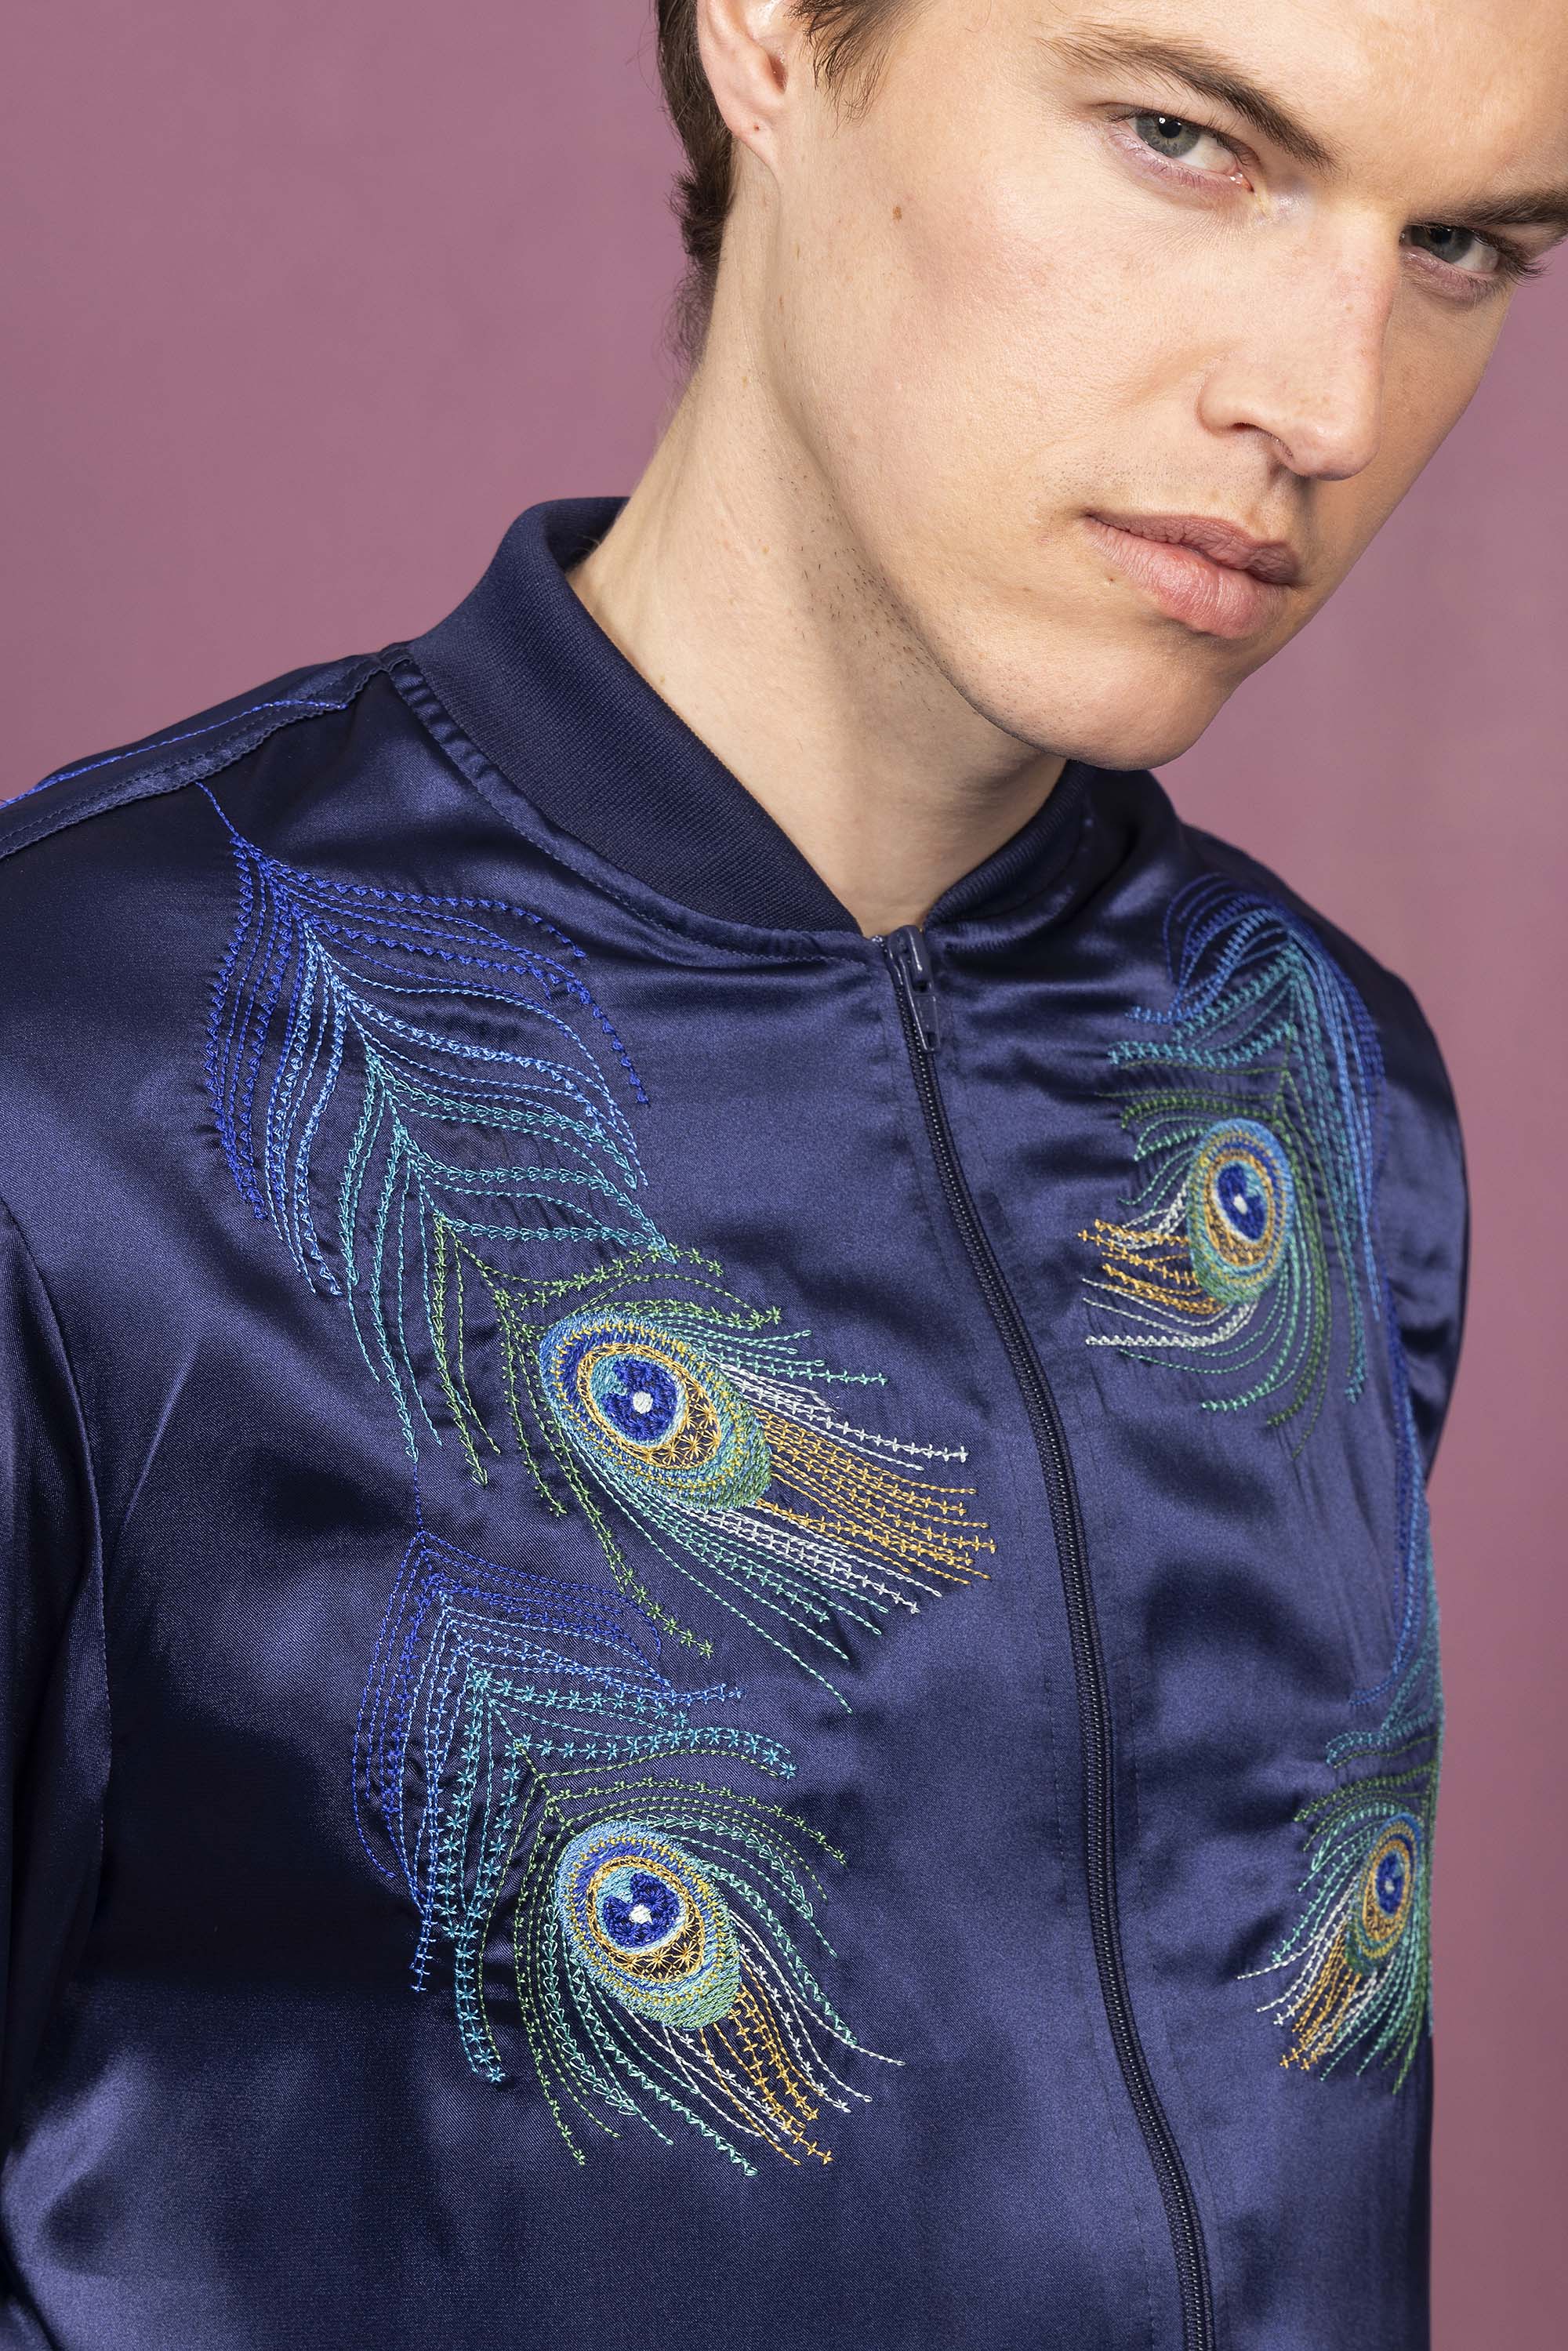 Souvenir bomber jacket with more peacock embroidery on the front and on the back, handmade in Peru at the Misericordia workshop